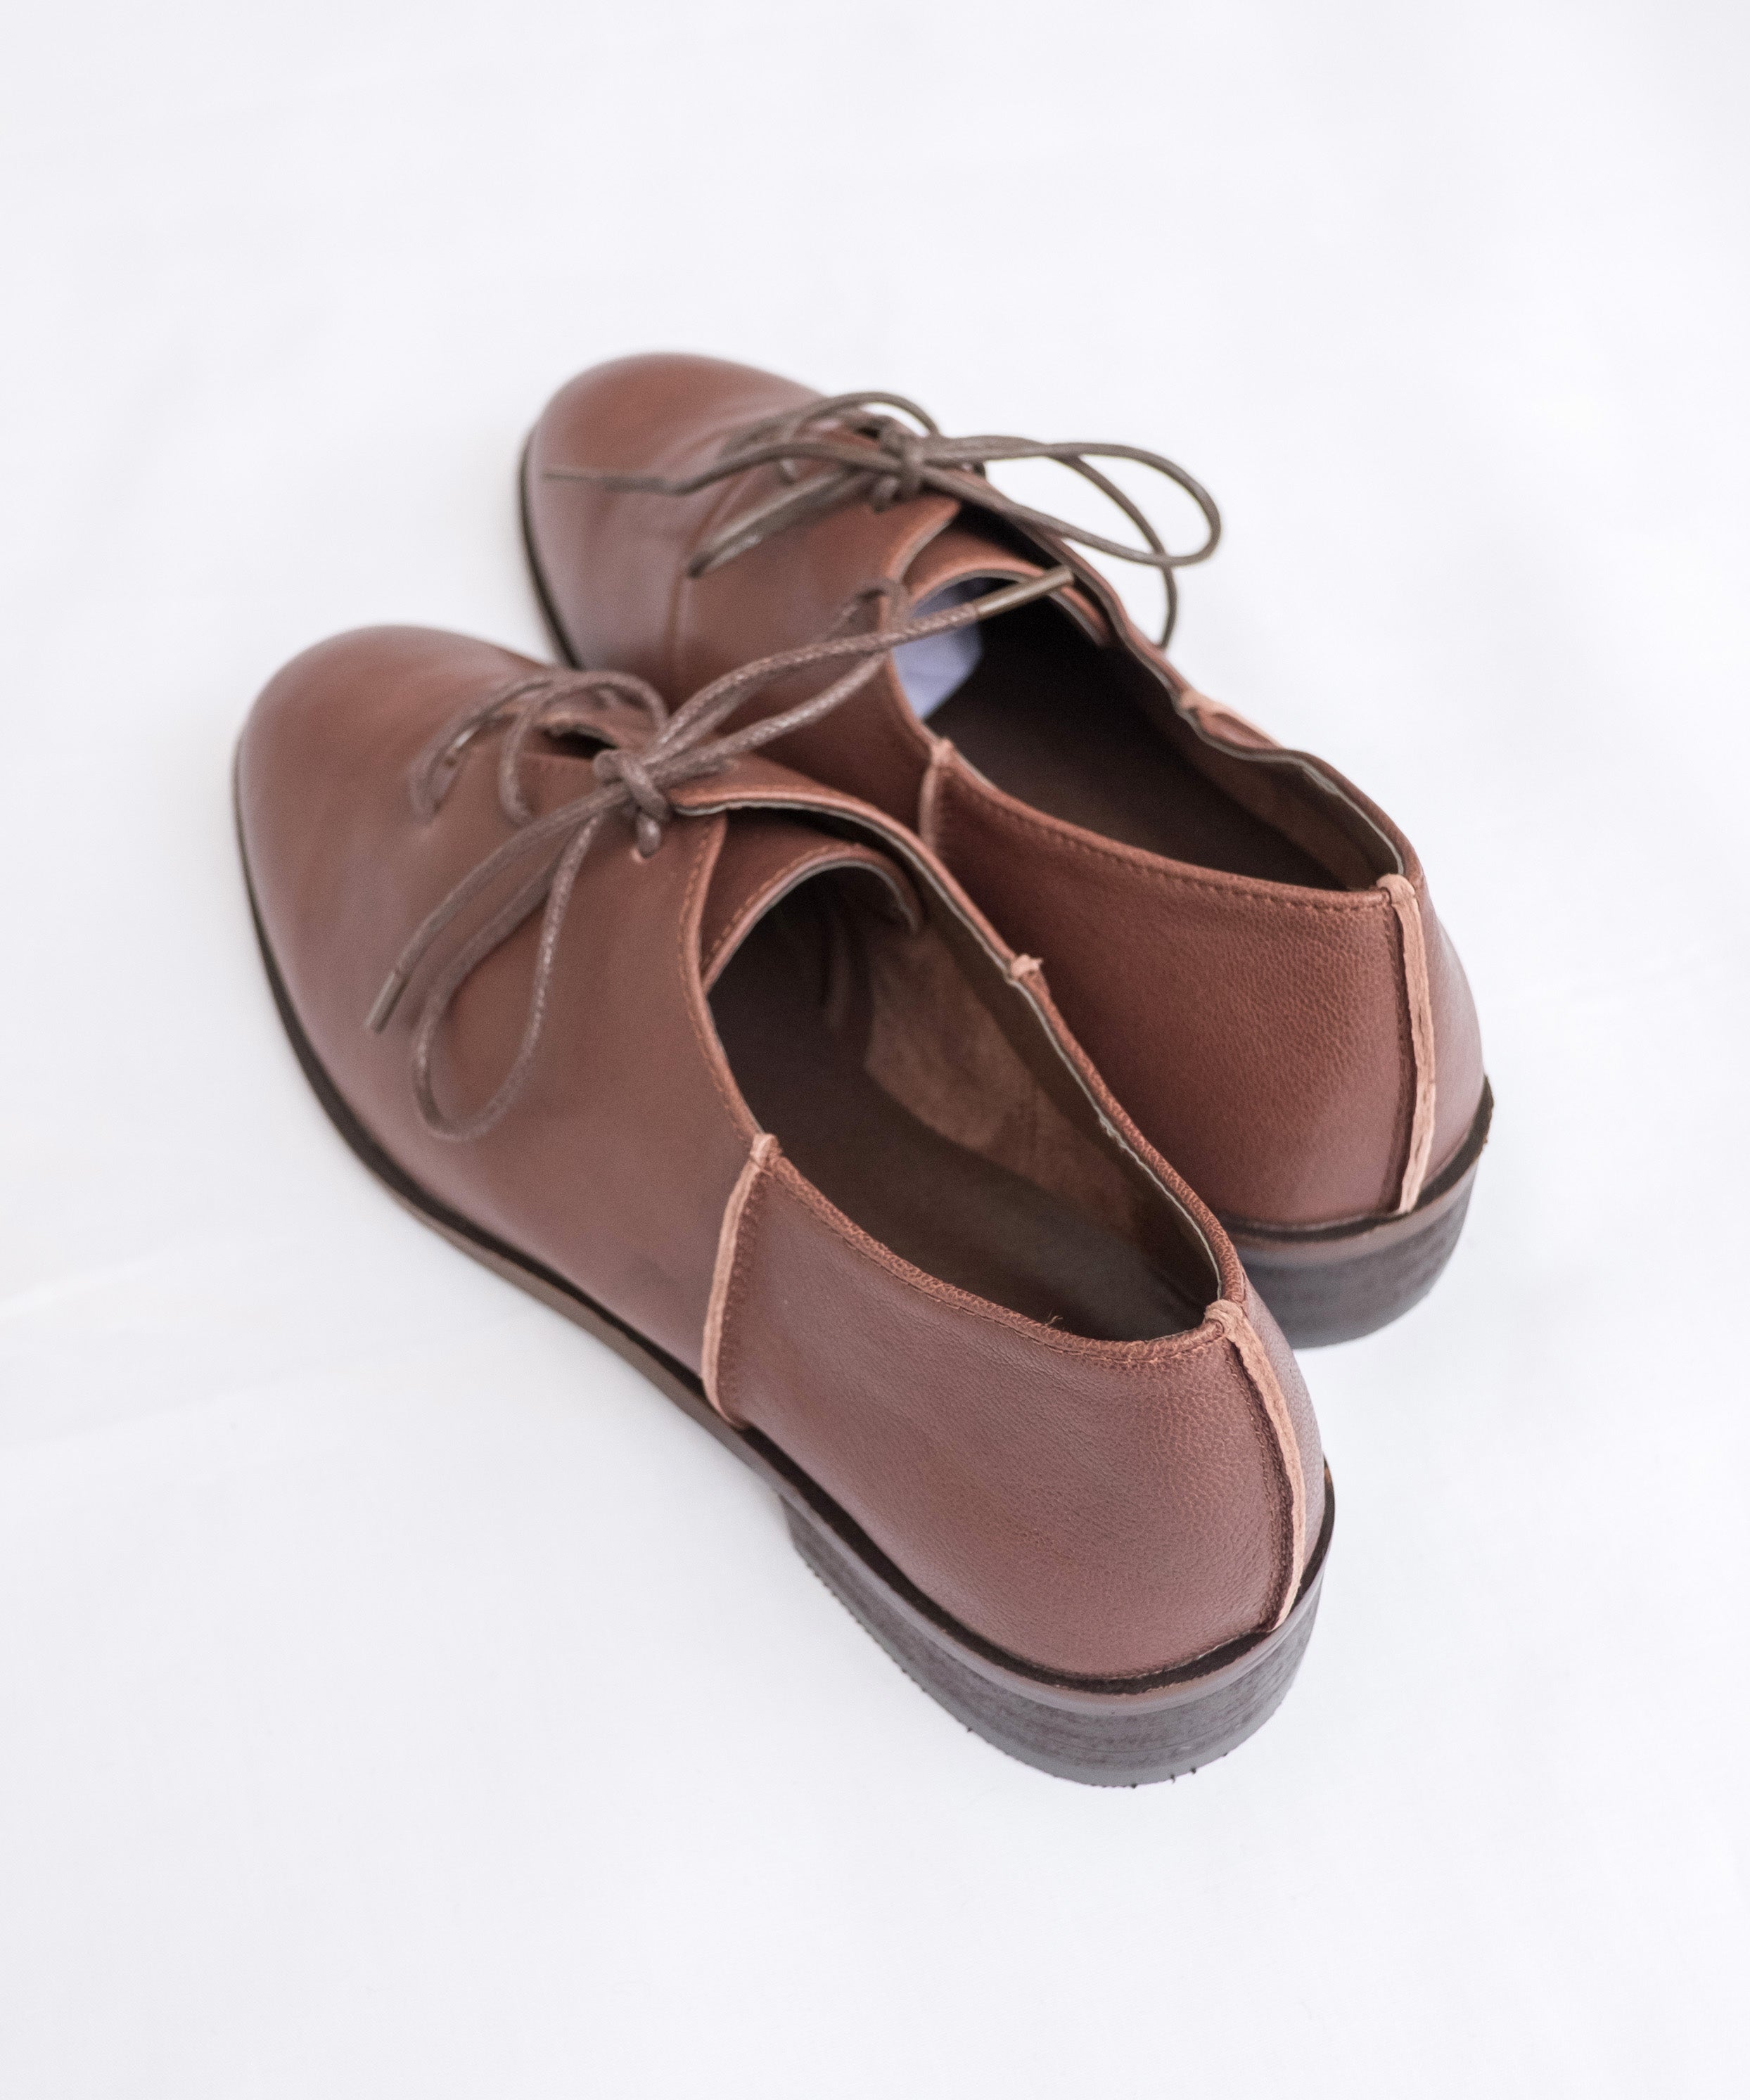 leather oxford 啡色牛皮經典牛津鞋, Shoes/ SH8053